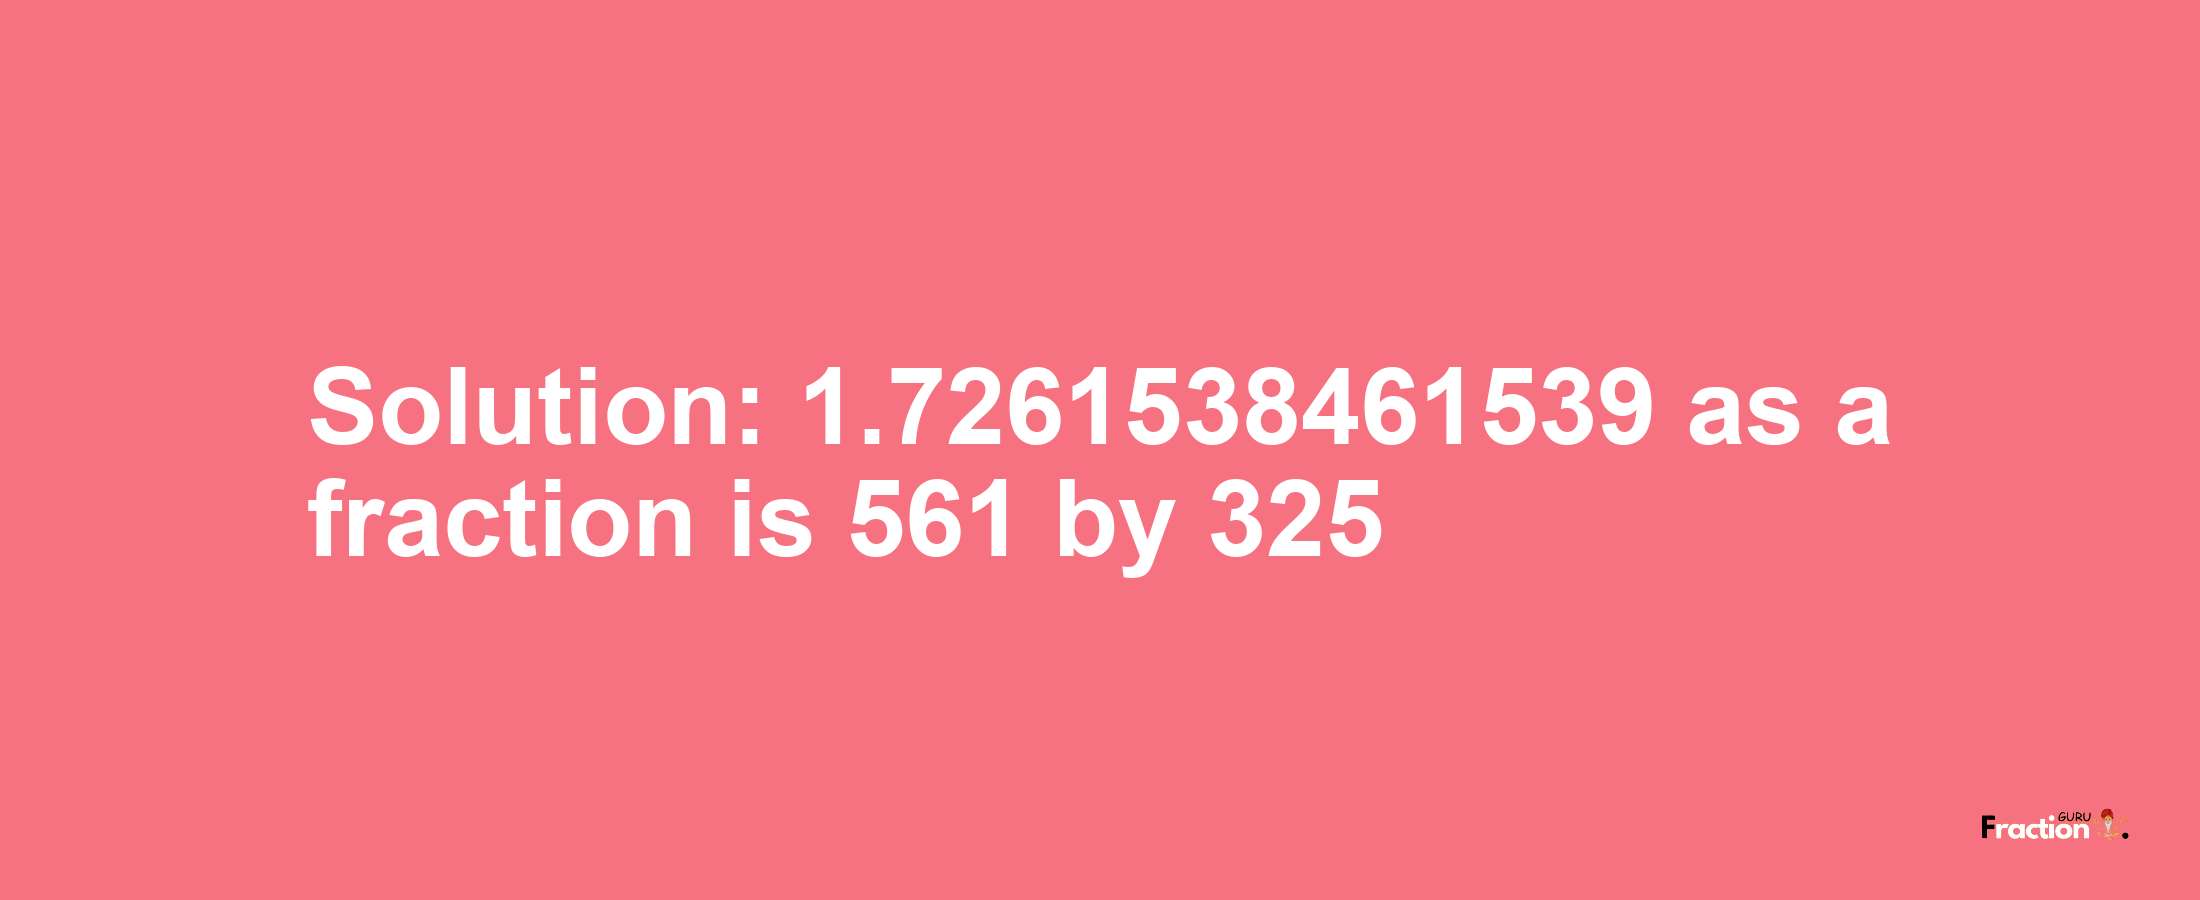 Solution:1.7261538461539 as a fraction is 561/325